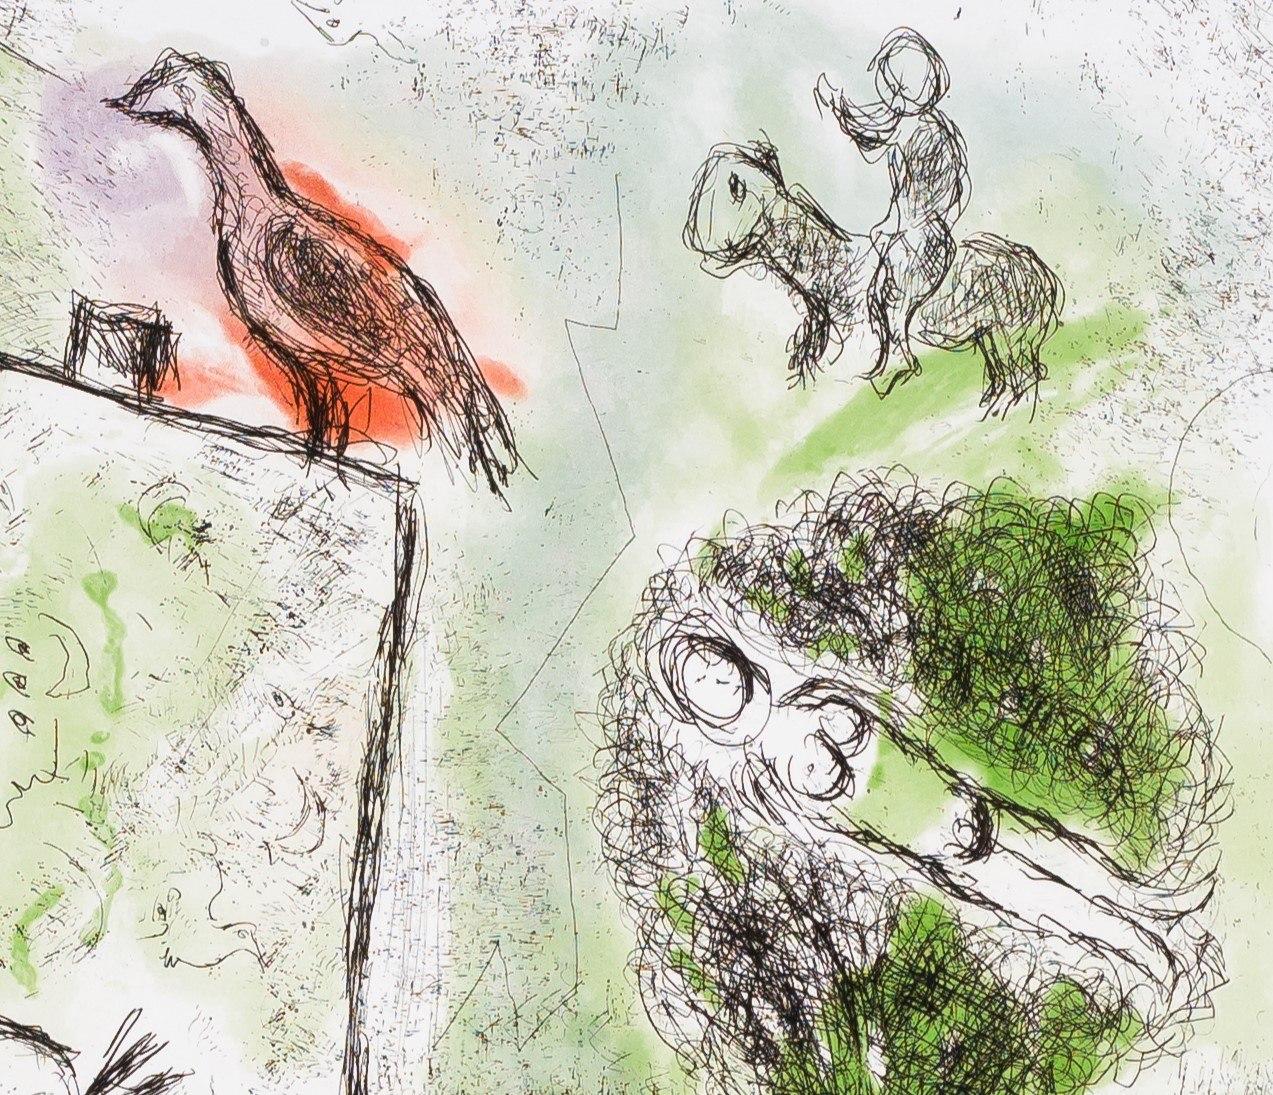 Inspiration, 1981 (Les Songes #8) - Modern Print by Marc Chagall